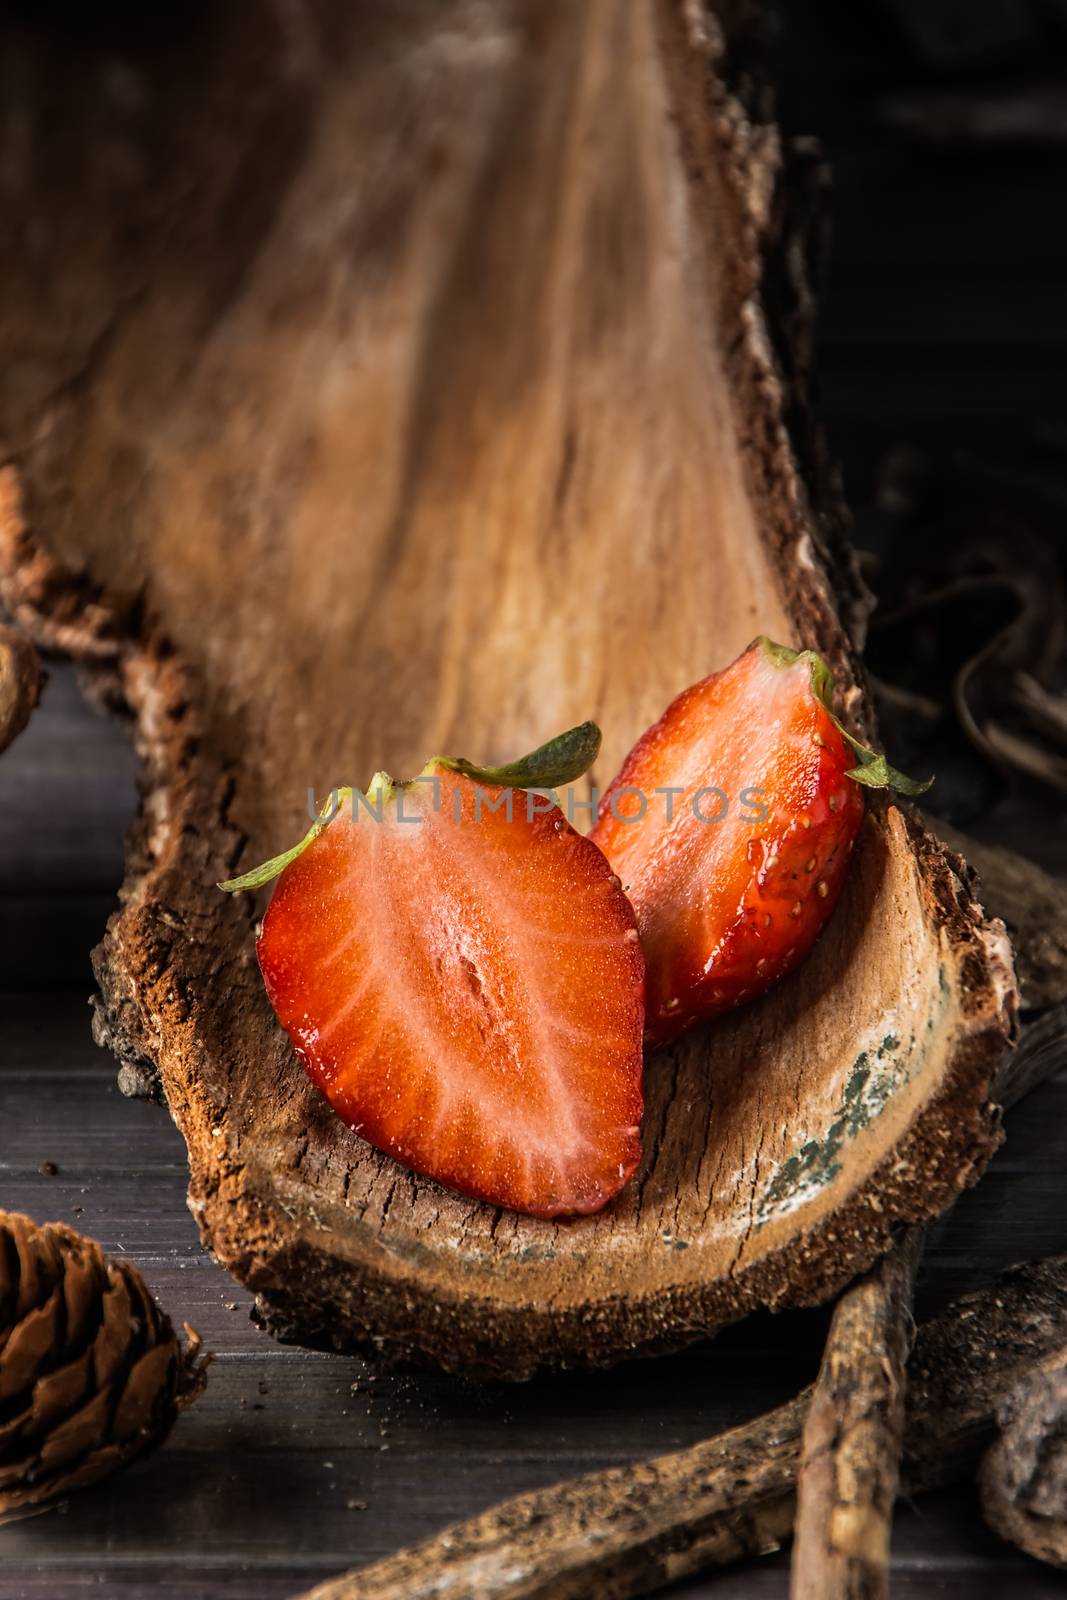 Strawberries with rustic decor in a wooden table. Vertical image.